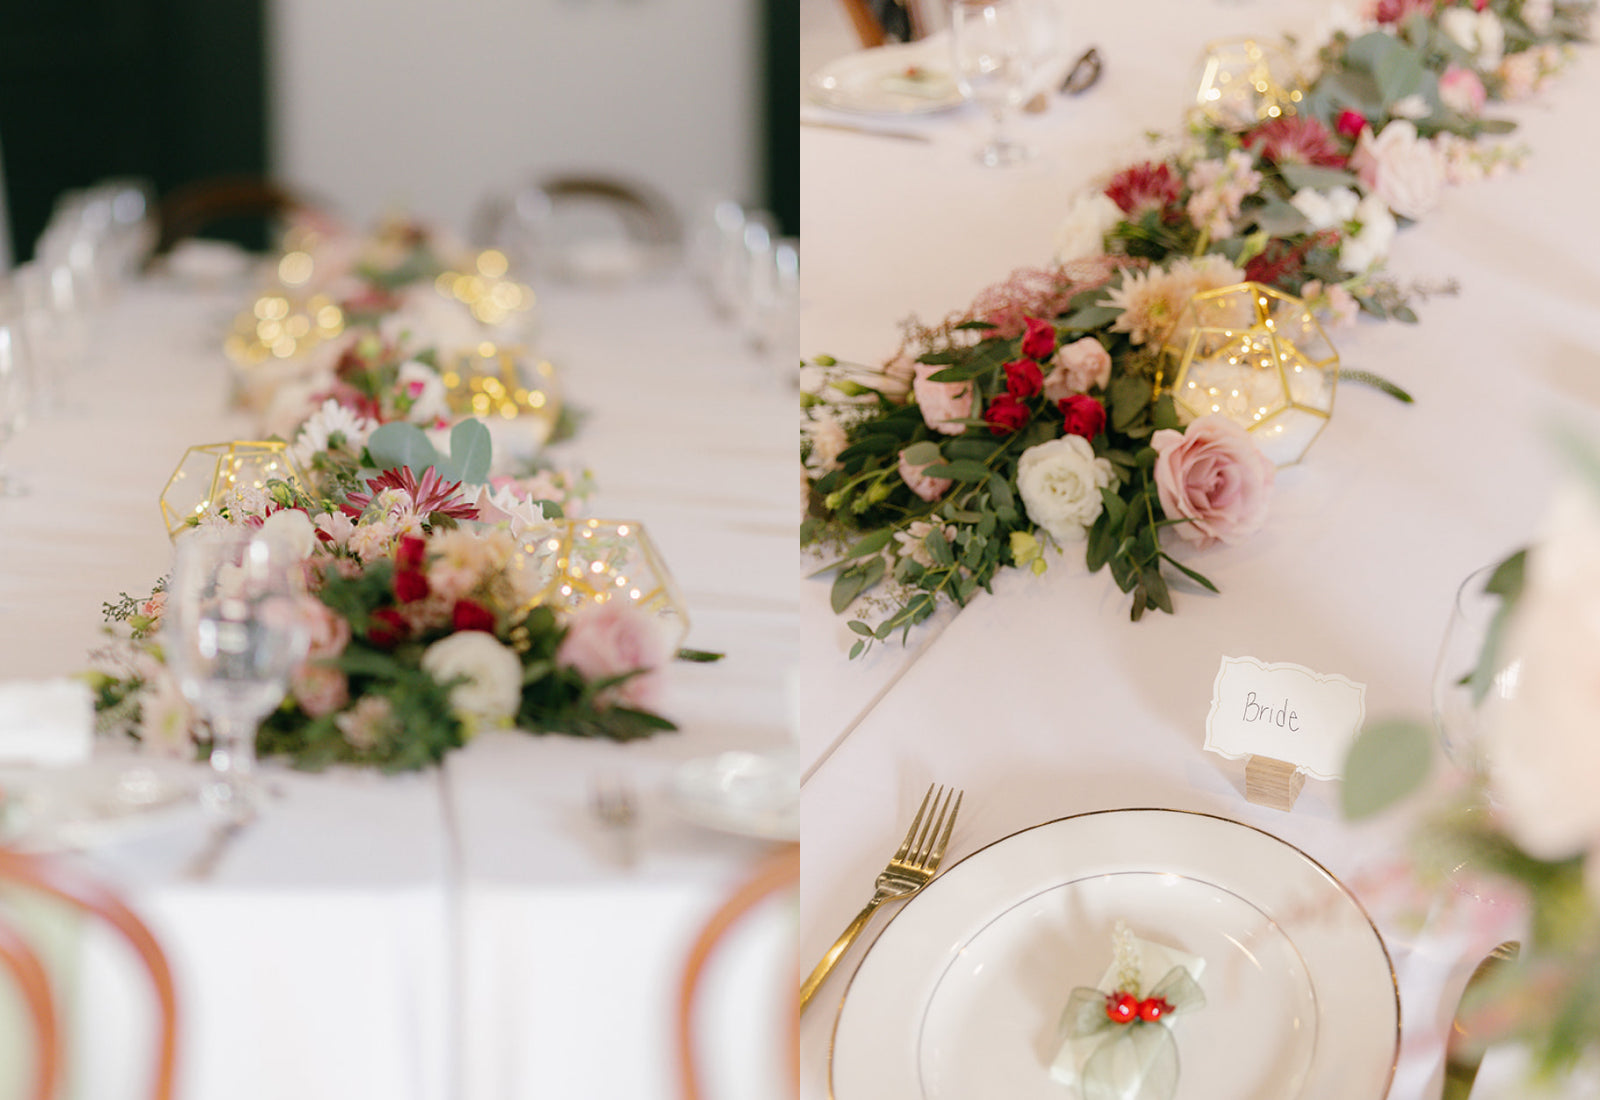 Two photos showing different views of a table top with a floral garland running down the center